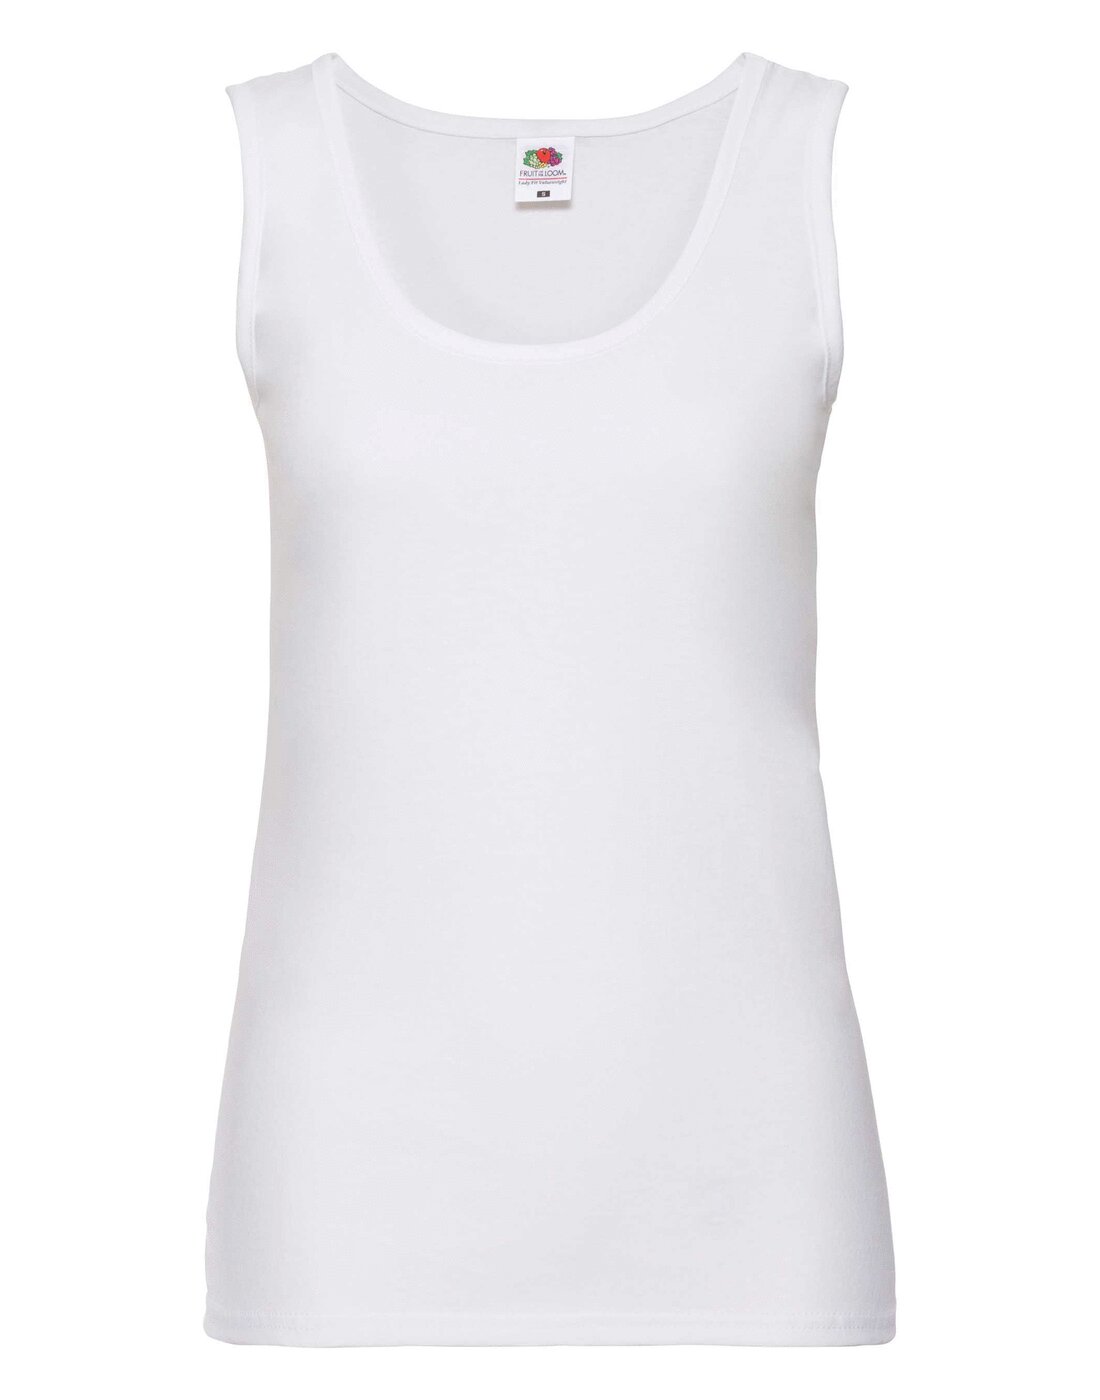 Fruit of the Loom Ladies Valueweight Vest - White